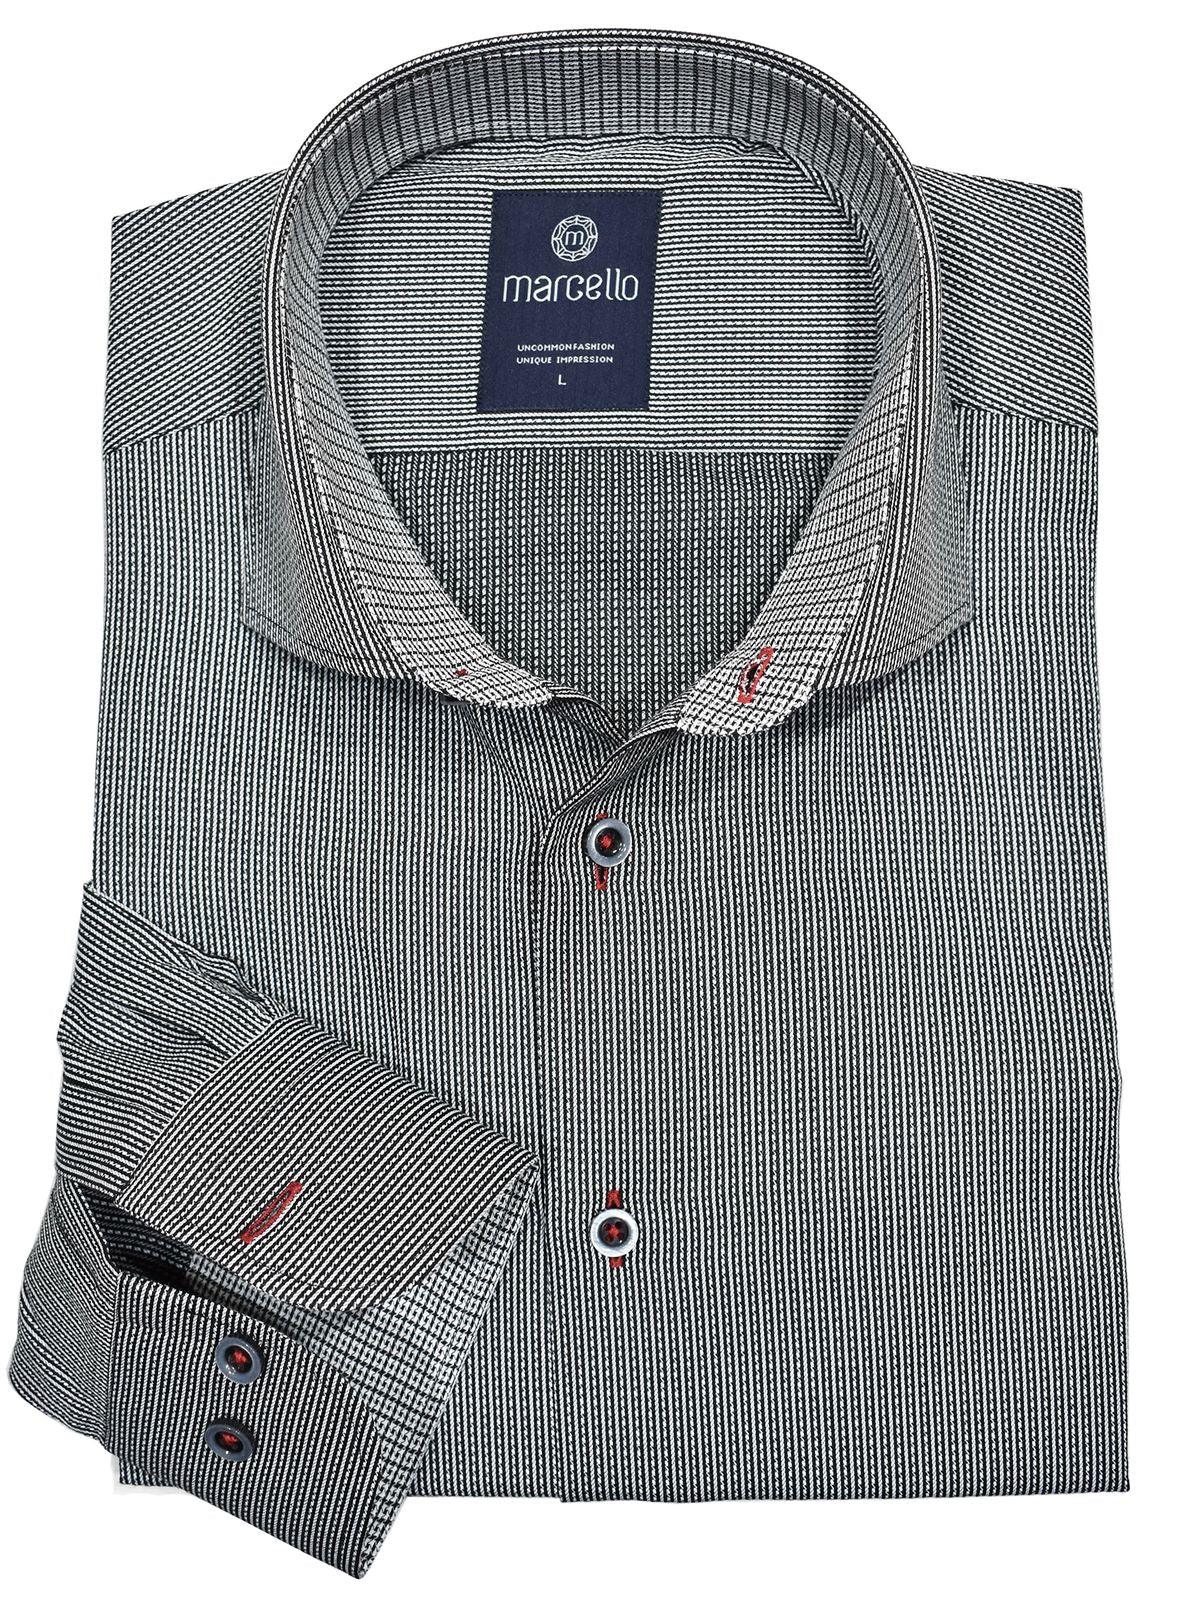 An outstanding shirt to pair with black or charcoal pants for jeans.  The fine pattern coupled with red accent stitching and custom details stand out in any setting.  Unica Milano Sophistacate Shirt